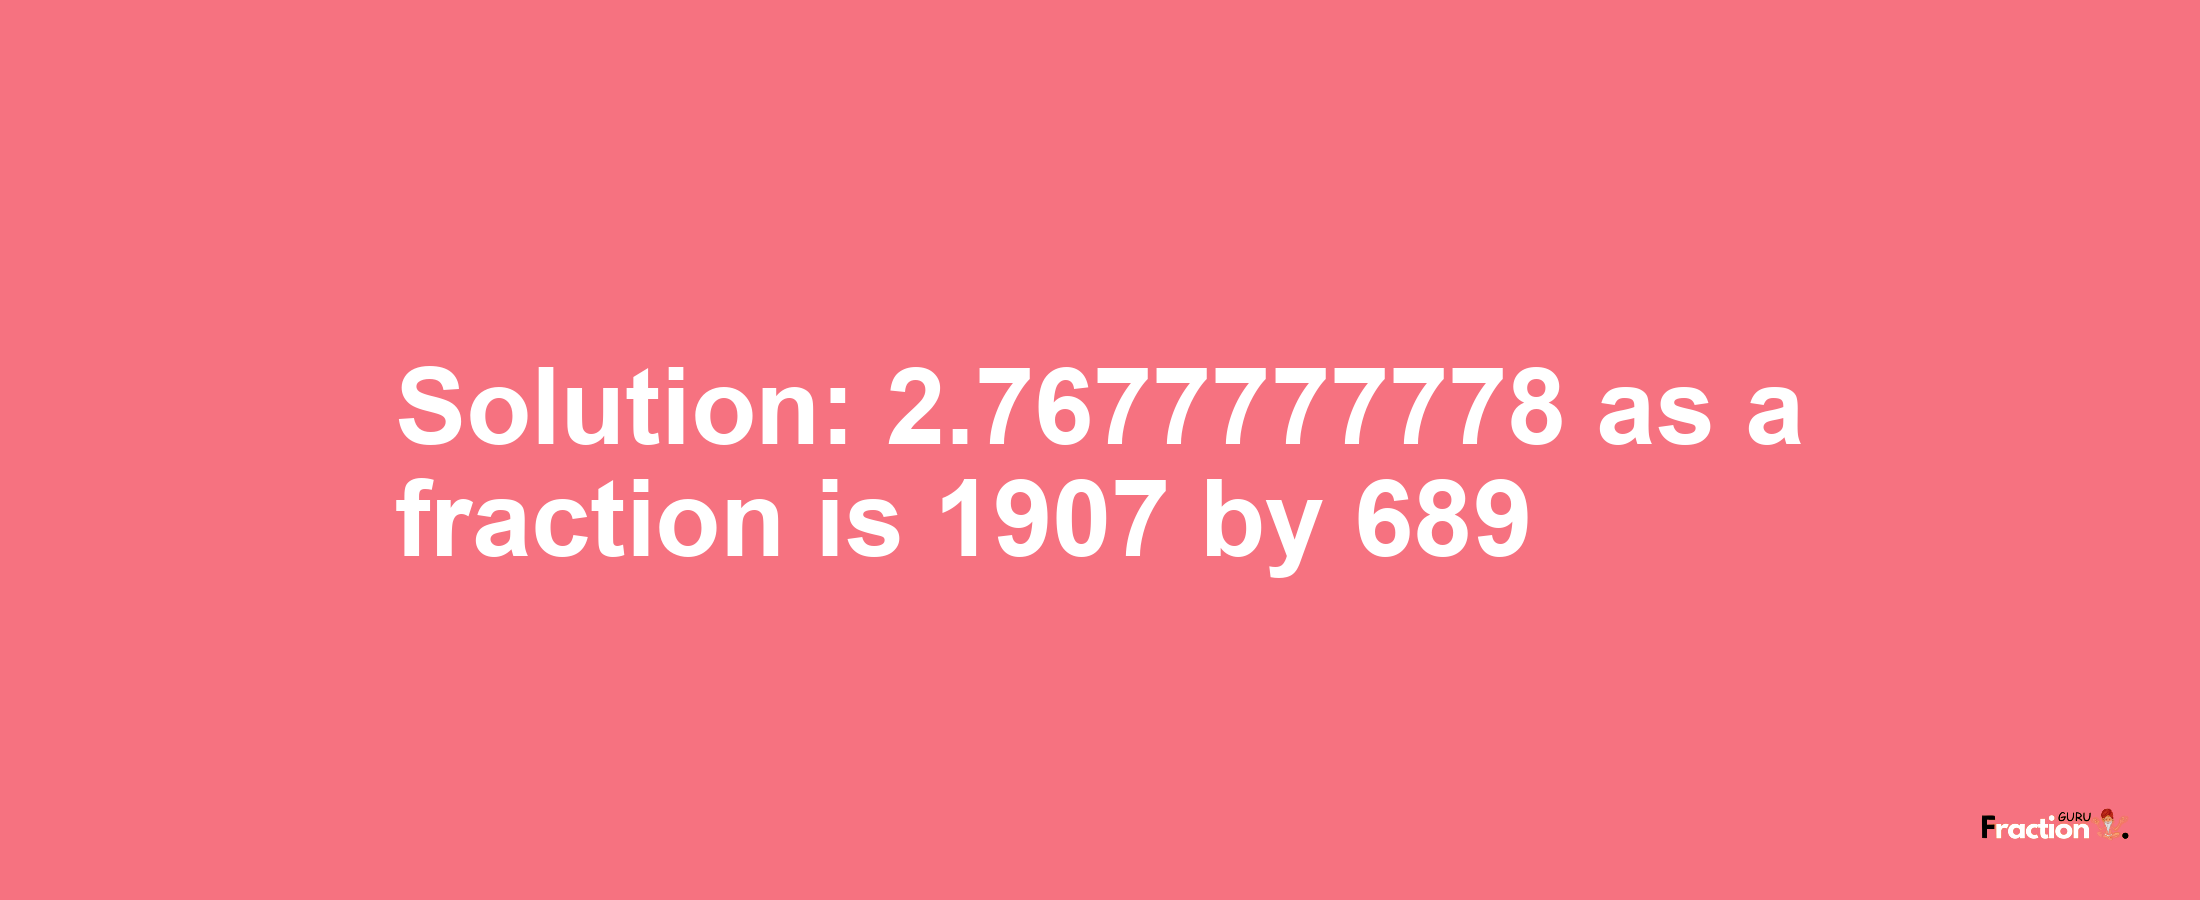 Solution:2.7677777778 as a fraction is 1907/689